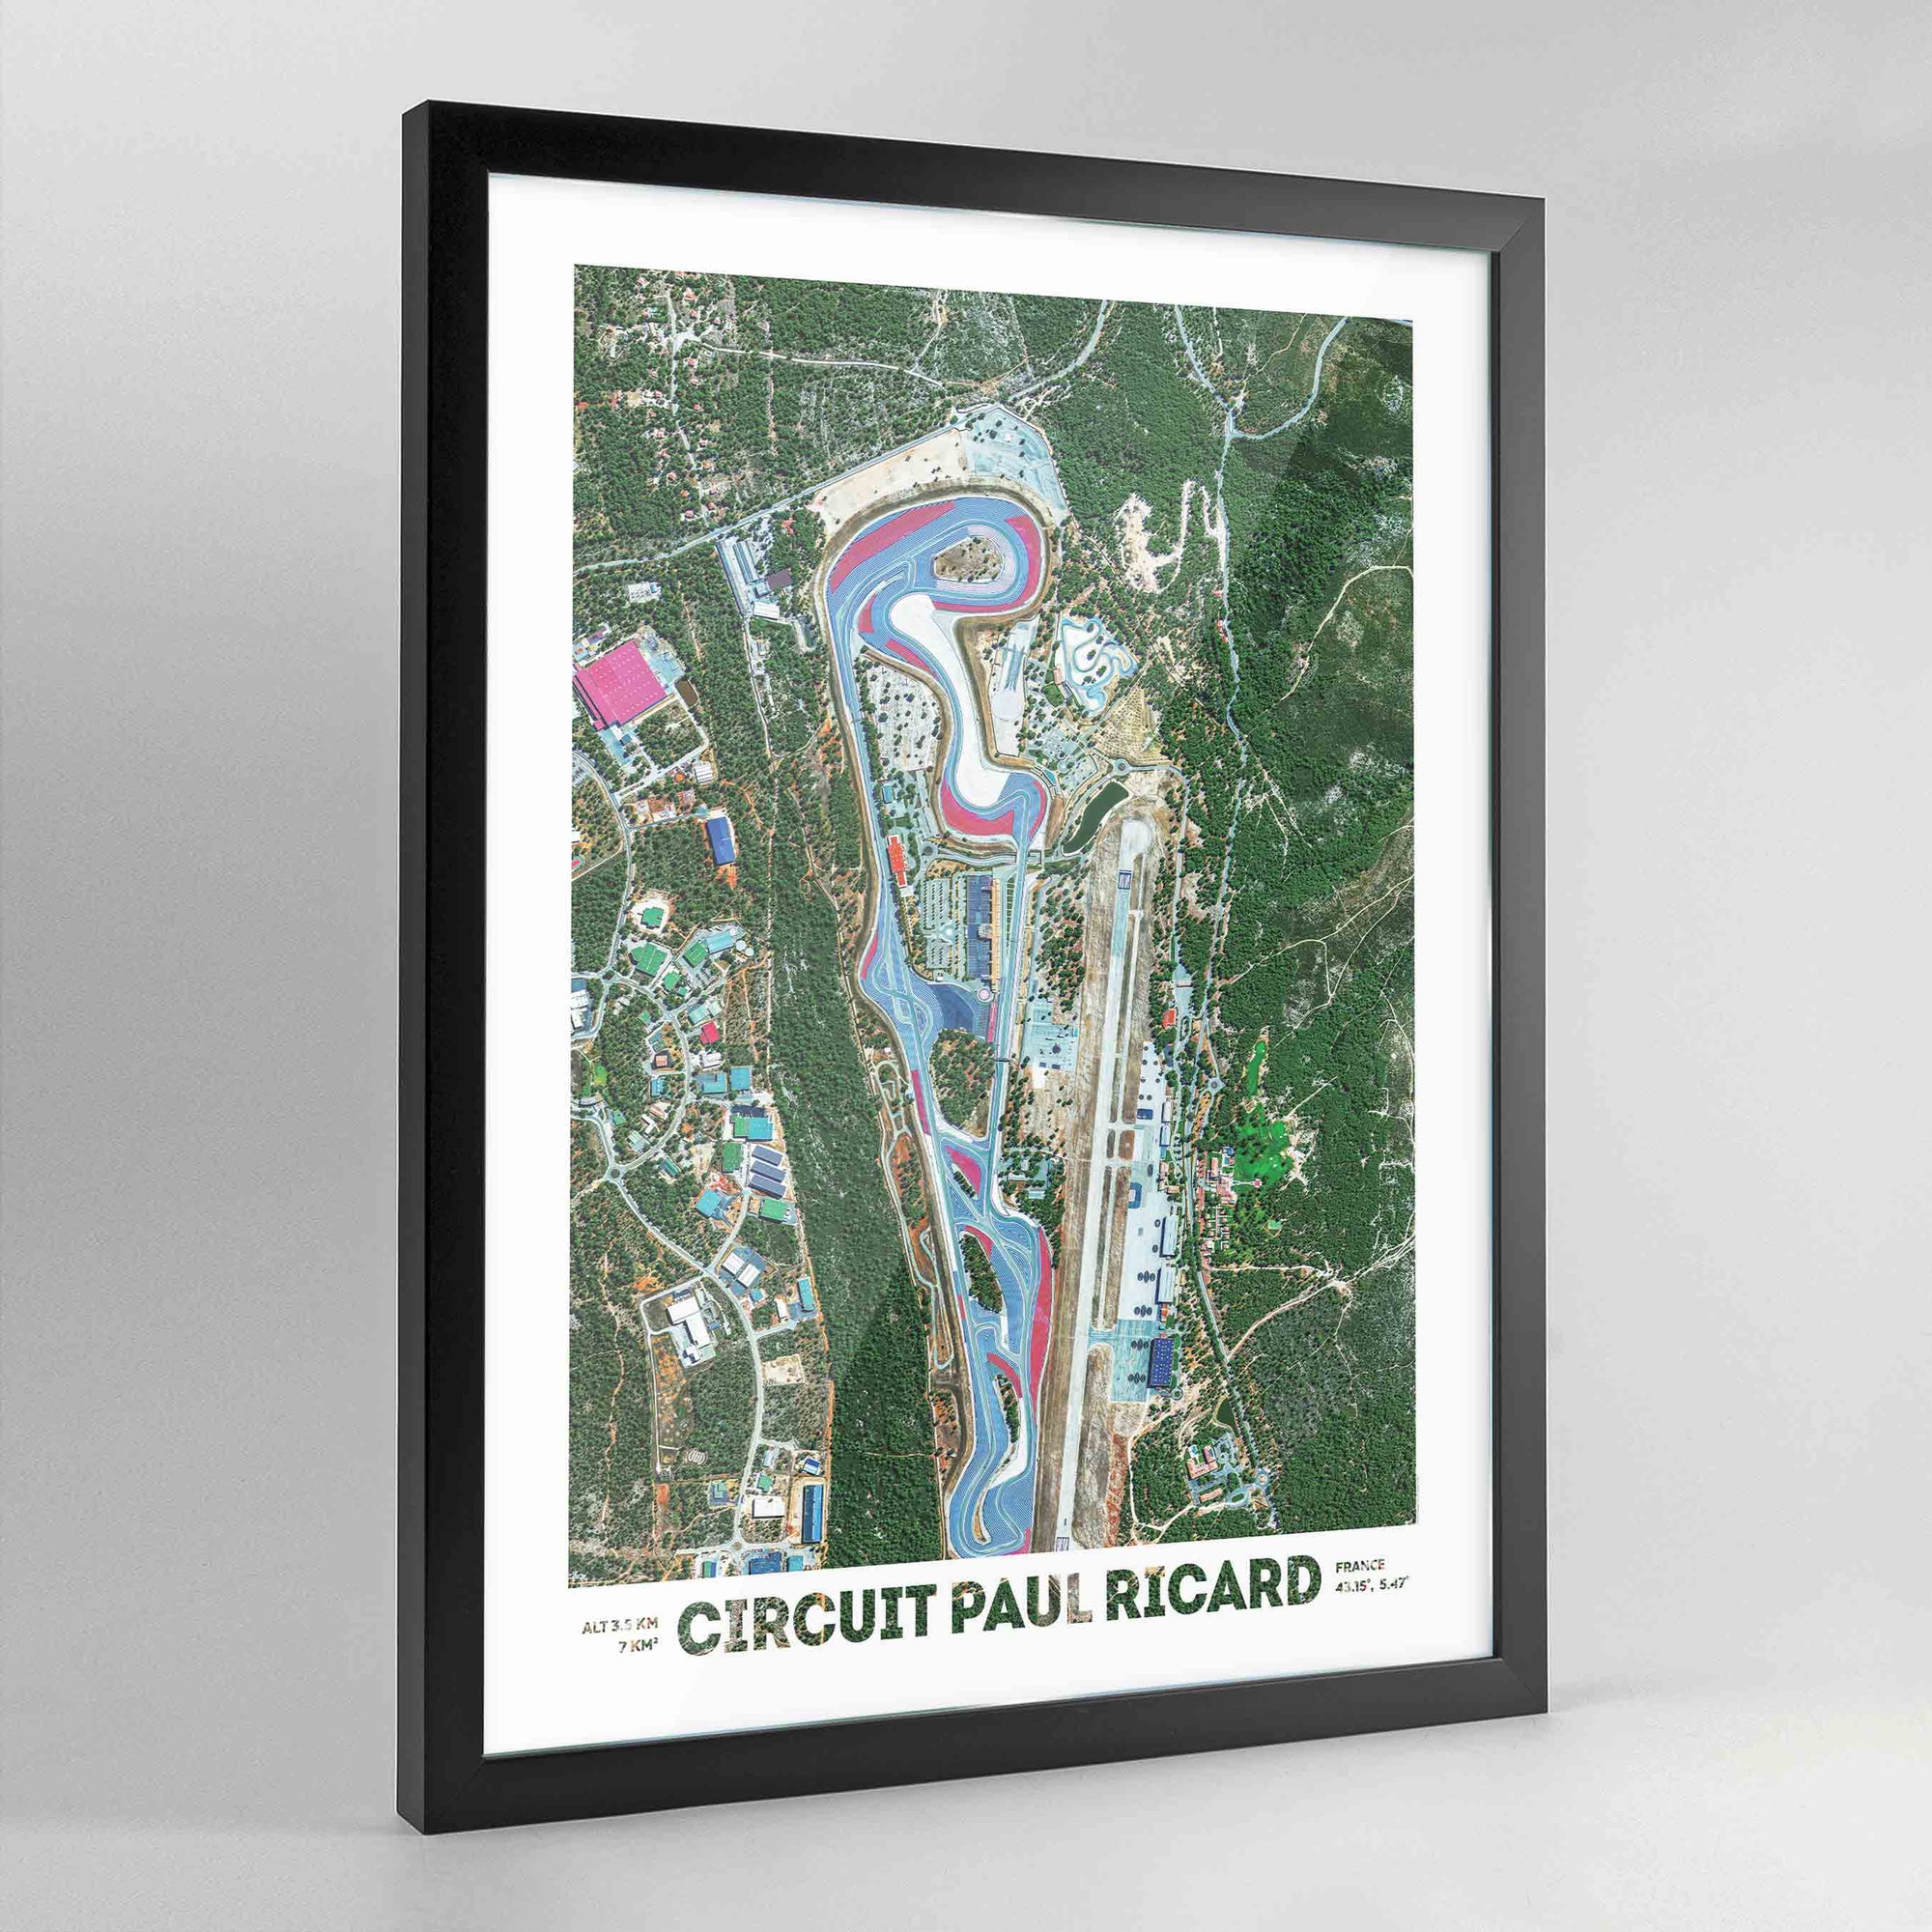 Circuit Paul Ricard Earth Photography - Art Print - Point Two Design